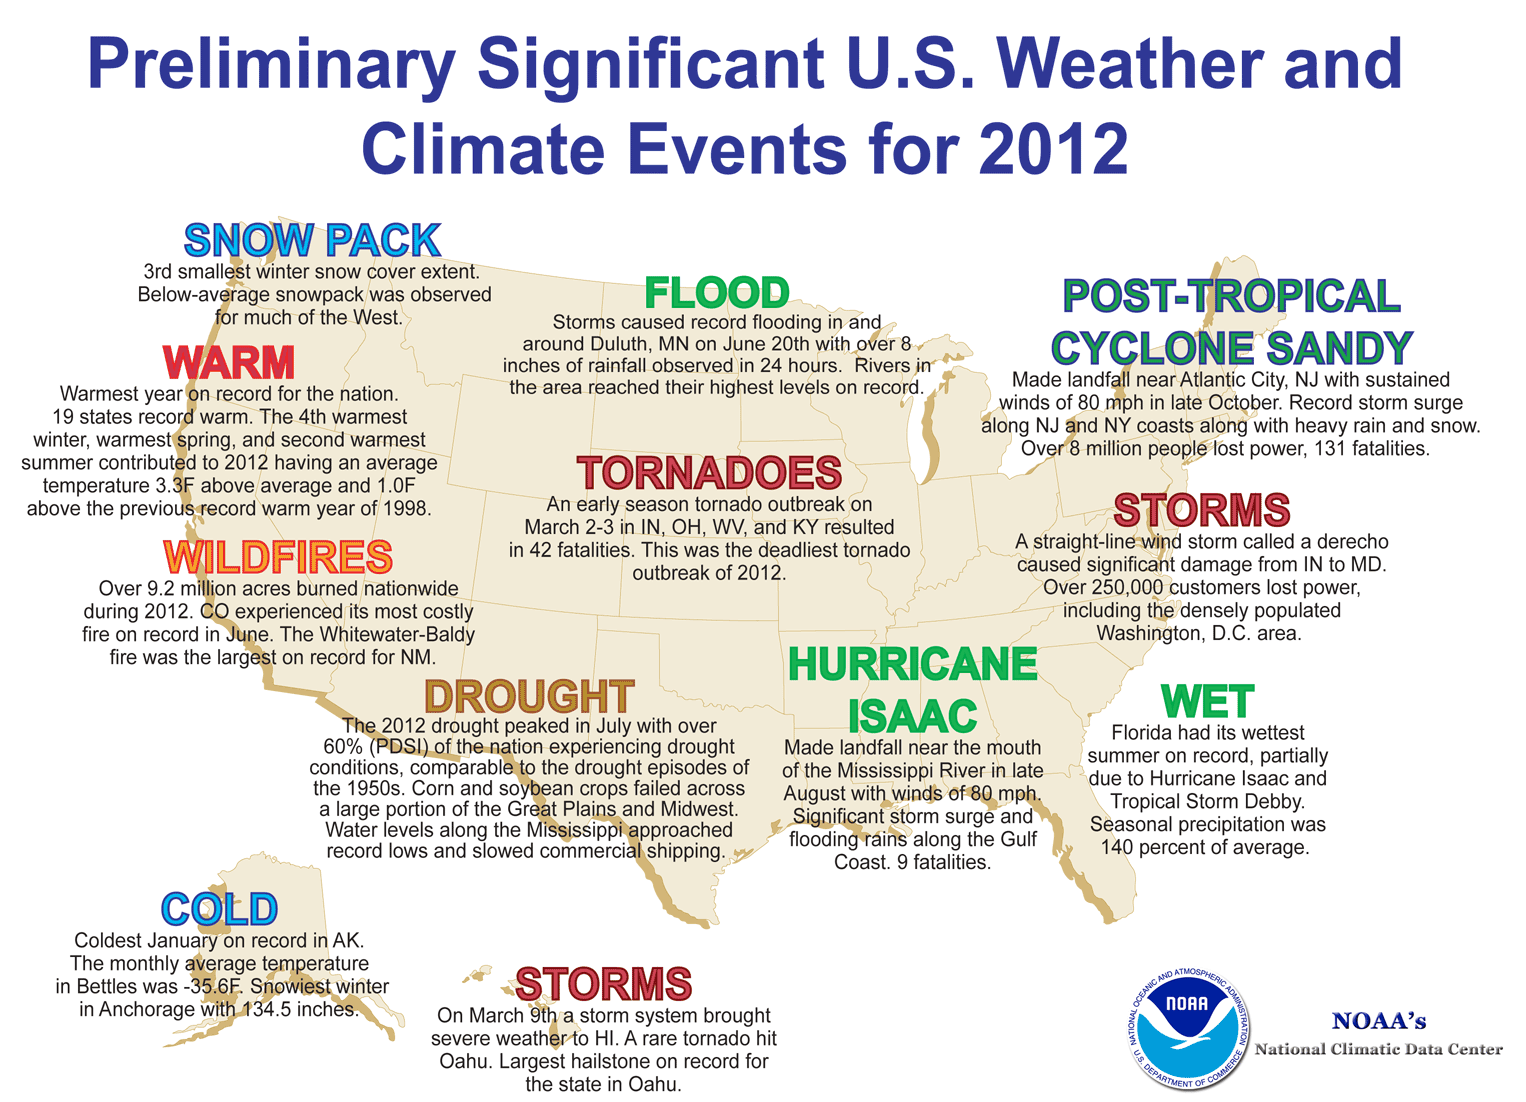 Significant Weather Events in 2012